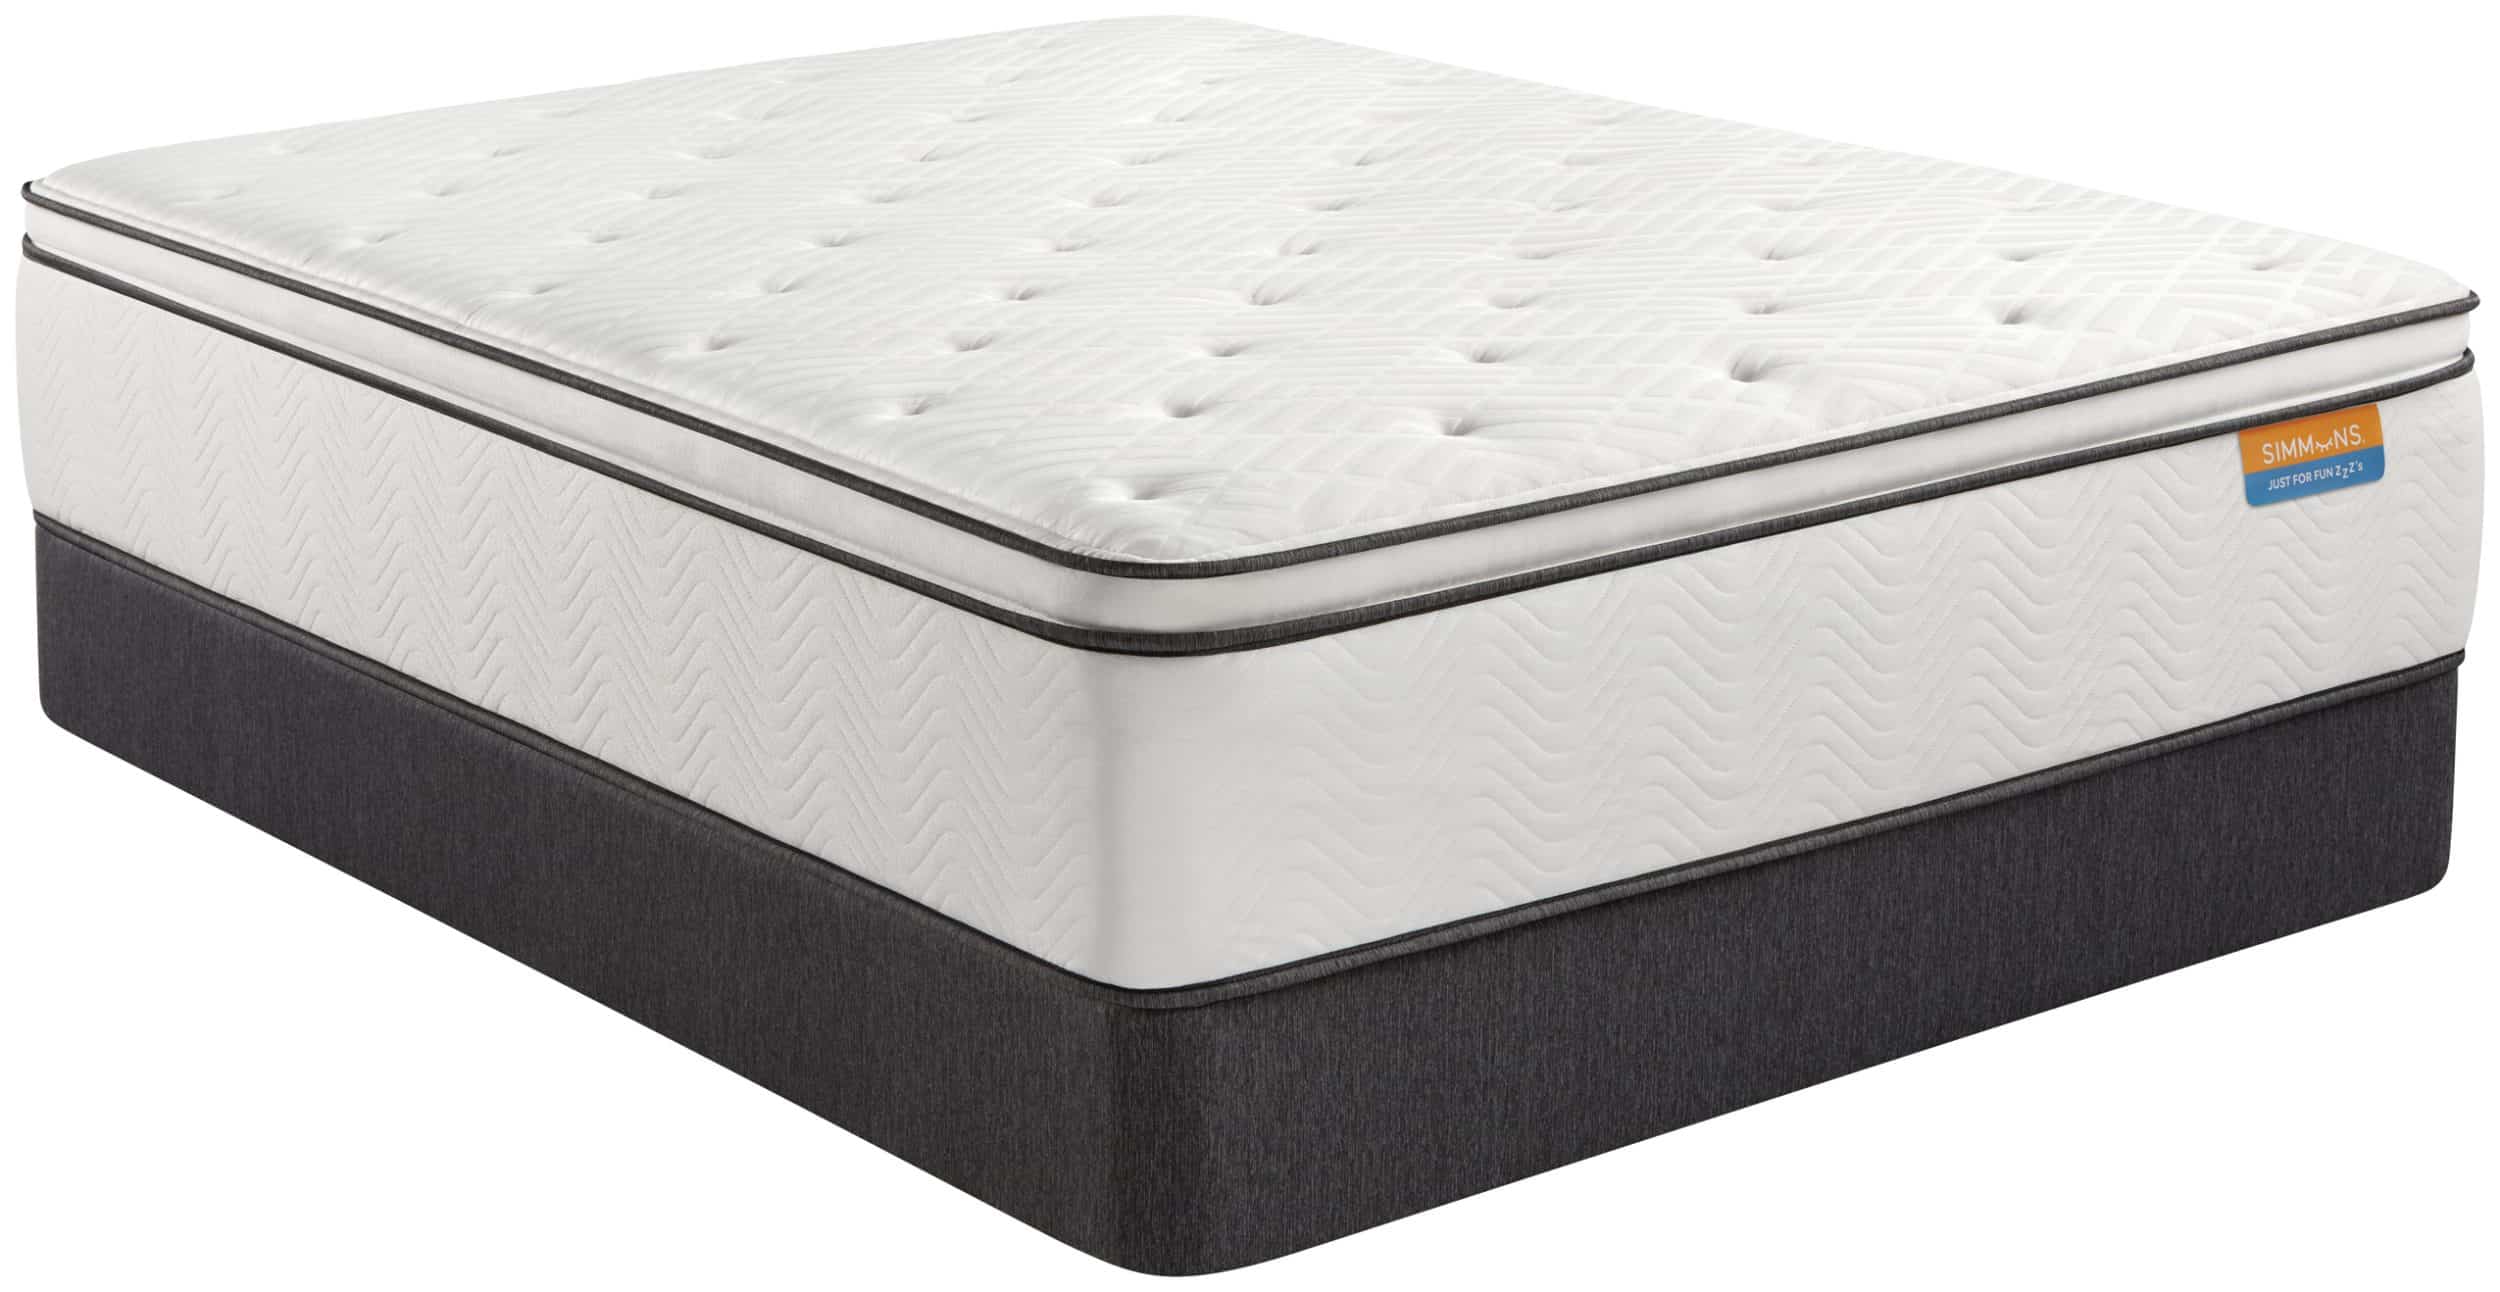 Side view of Simmons white mattress